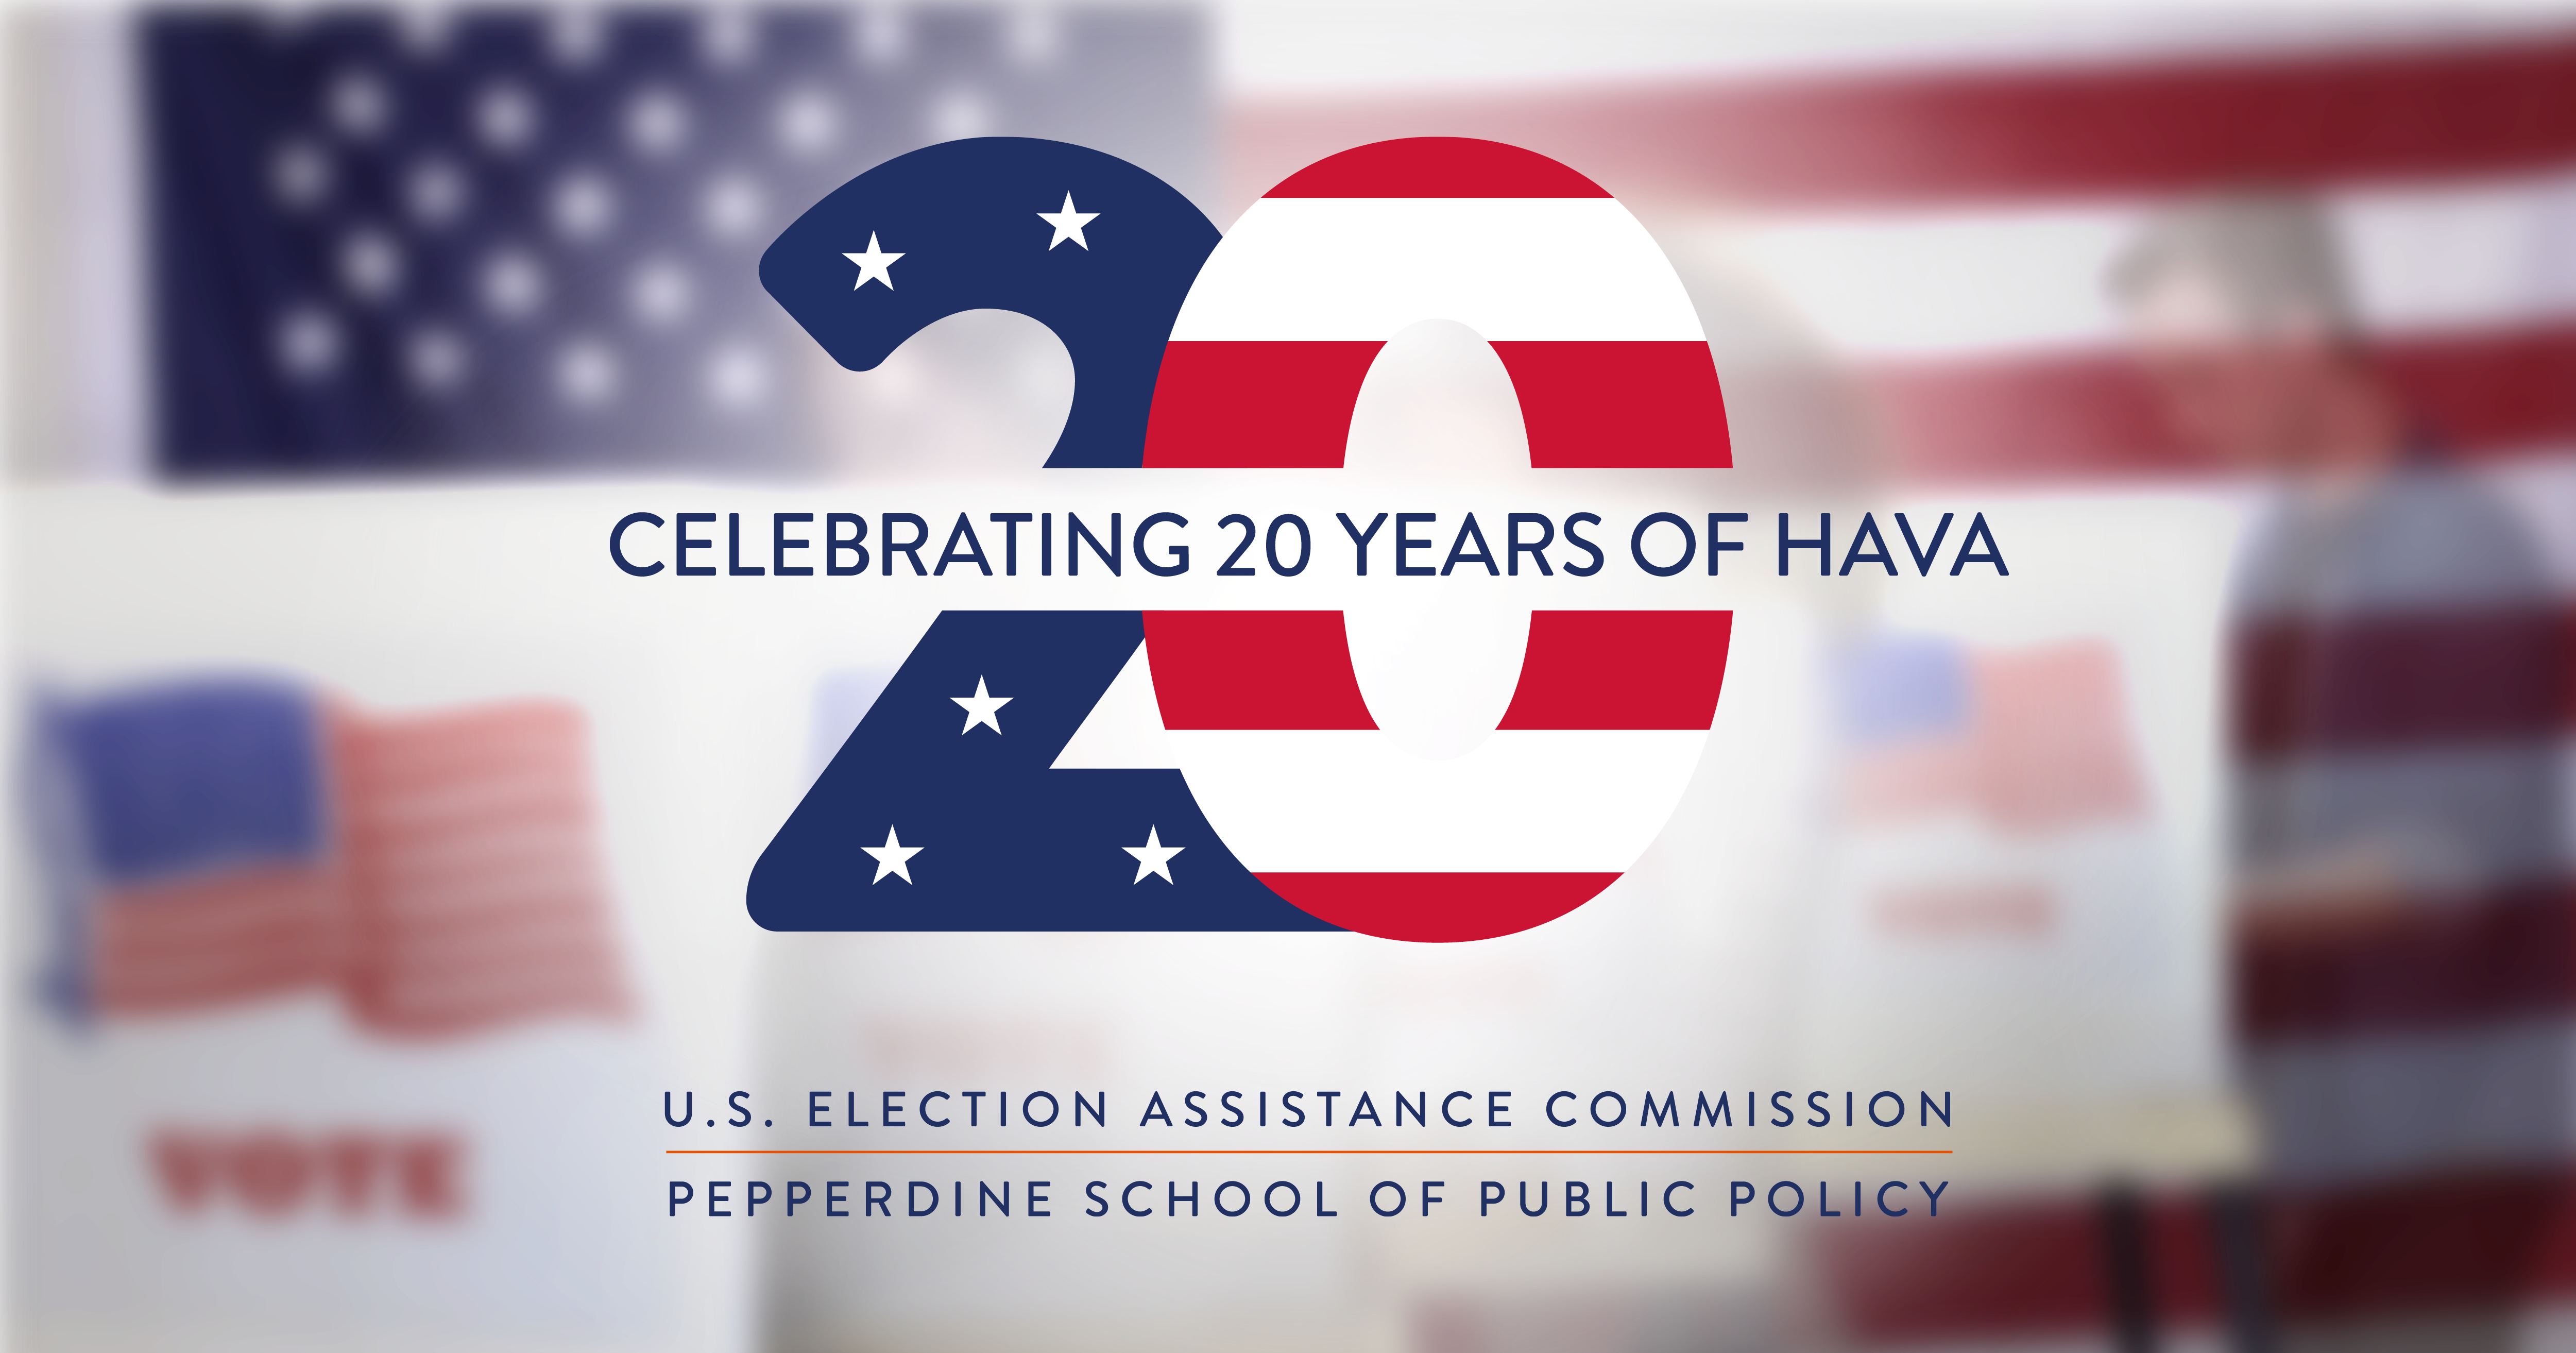 "Image shows a graphic that says Celebrating 20 Years of HAVA. U.S. Election Assistance Commission and Pepperdine School of Public Policy."